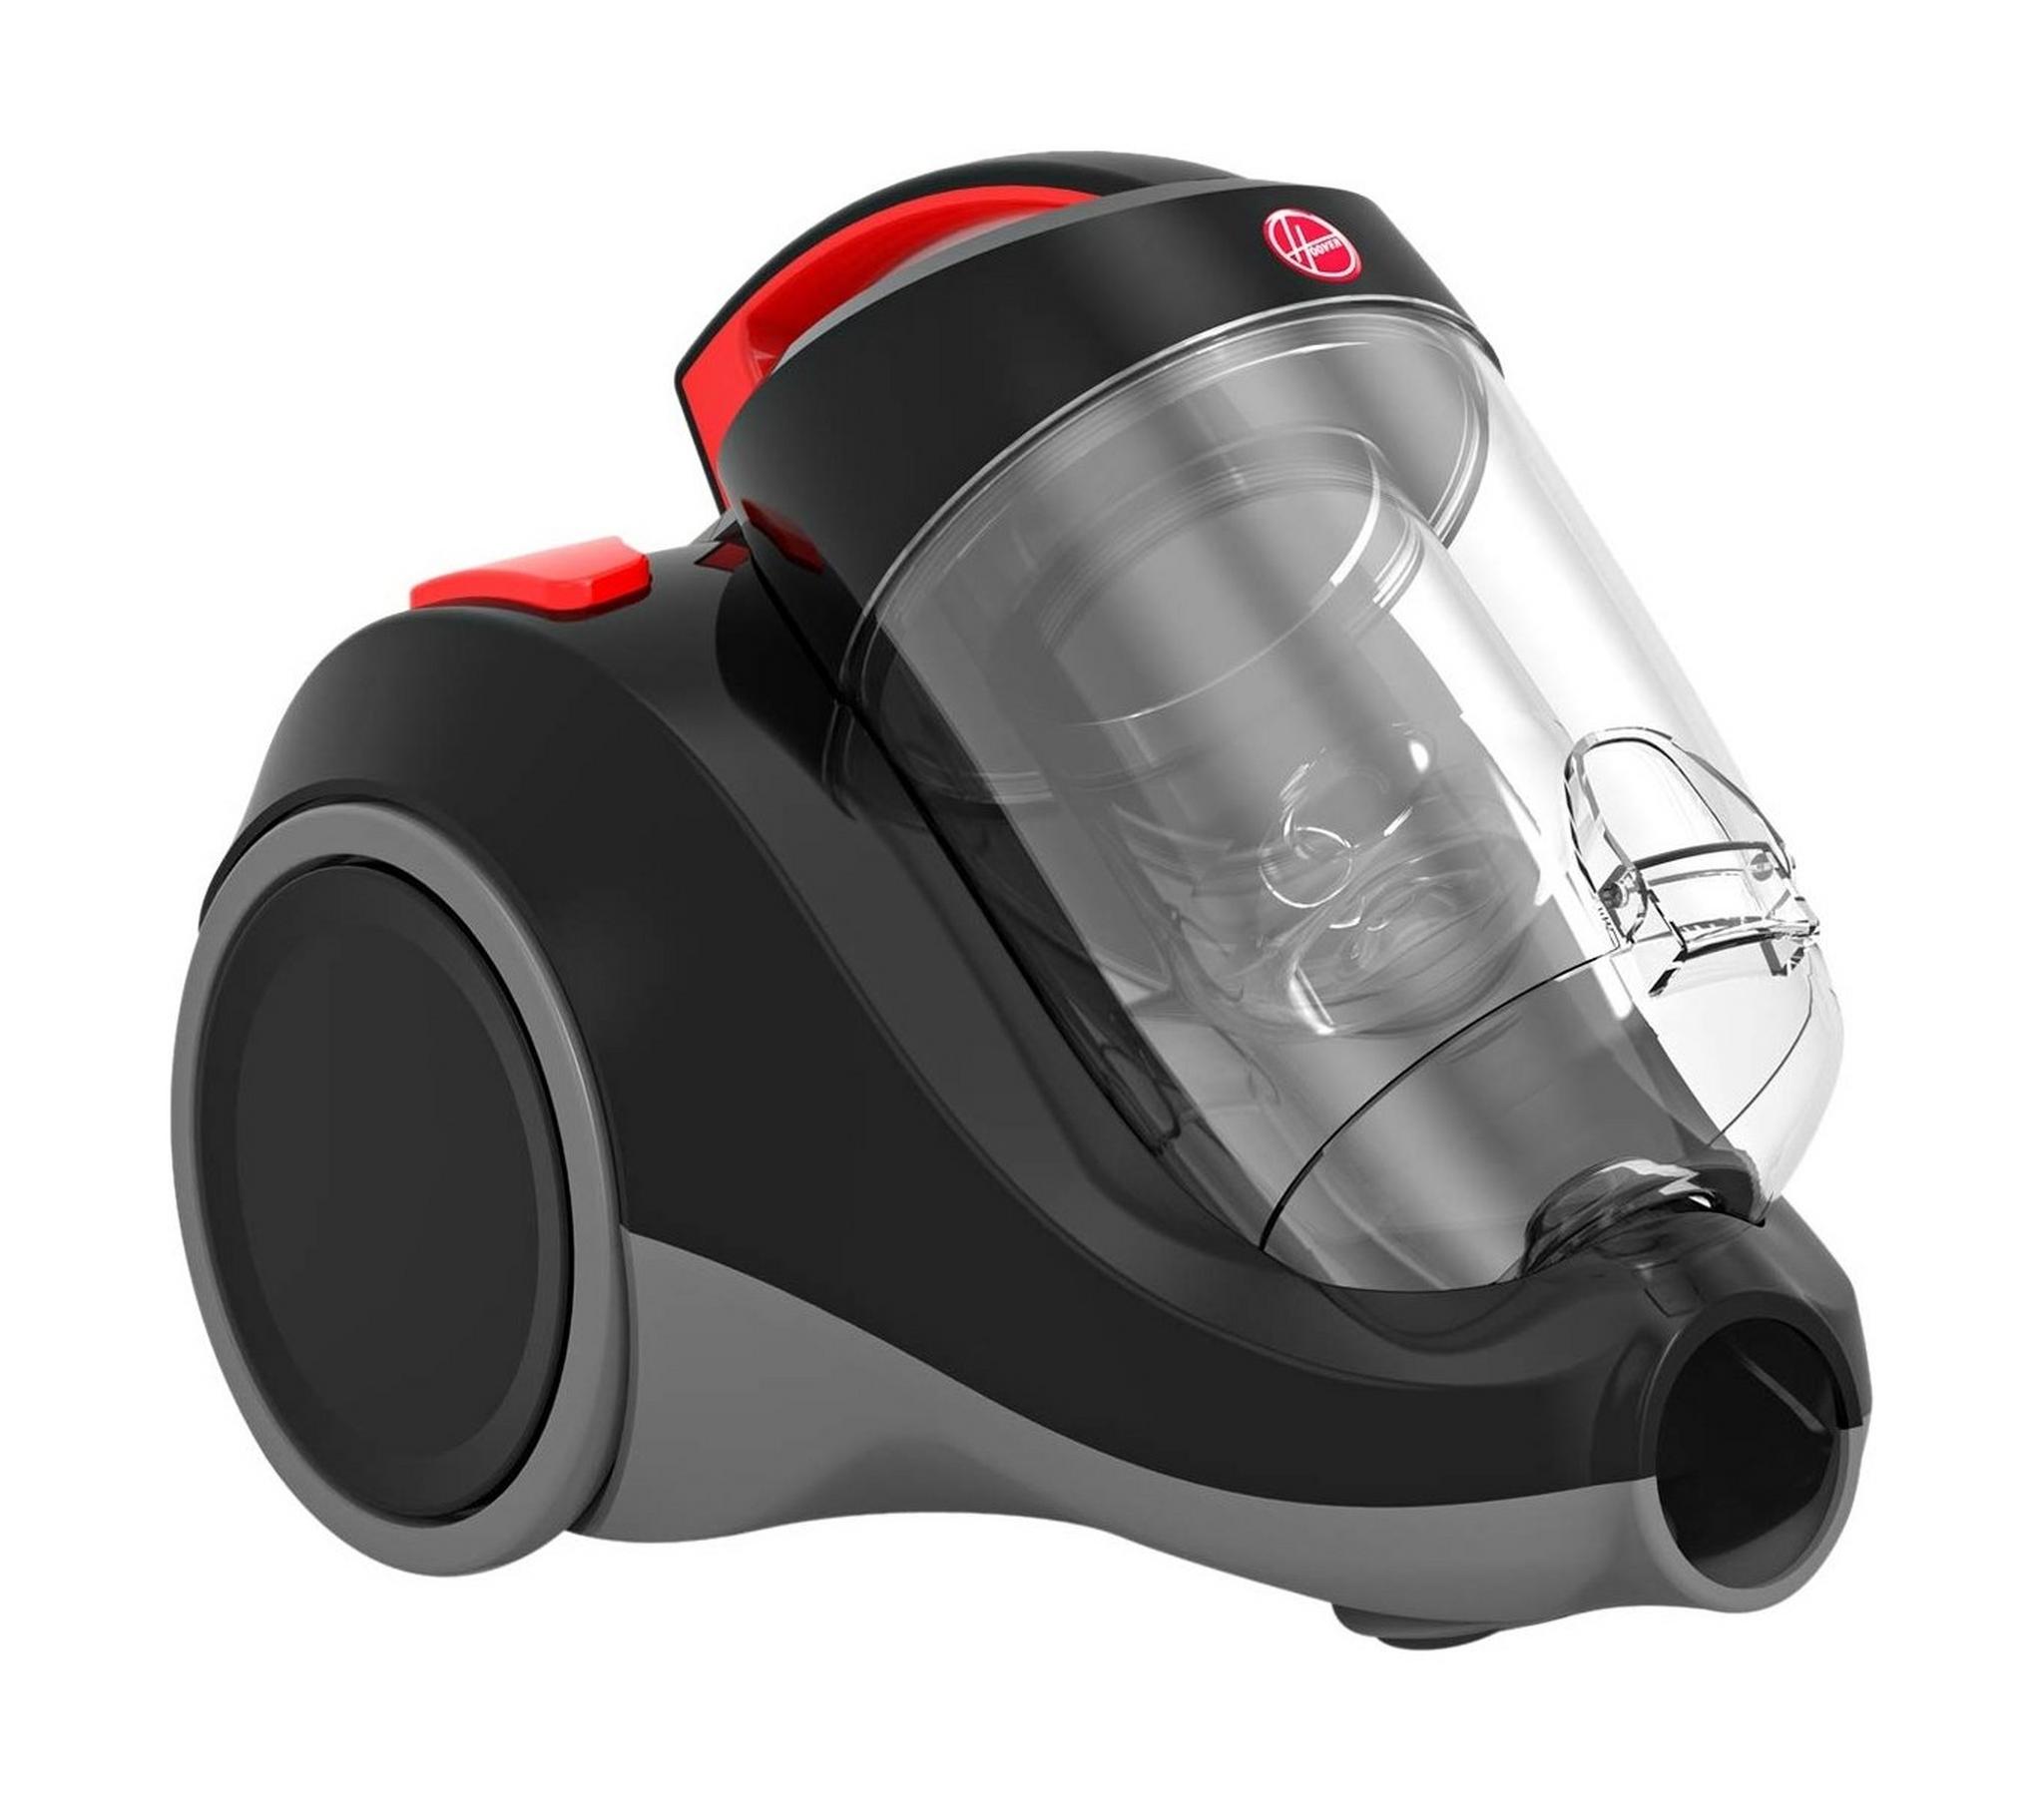 Hoover HC85-ZM-ME Zoom Max 2000W 2.5L Canister Vacuum Cleaner